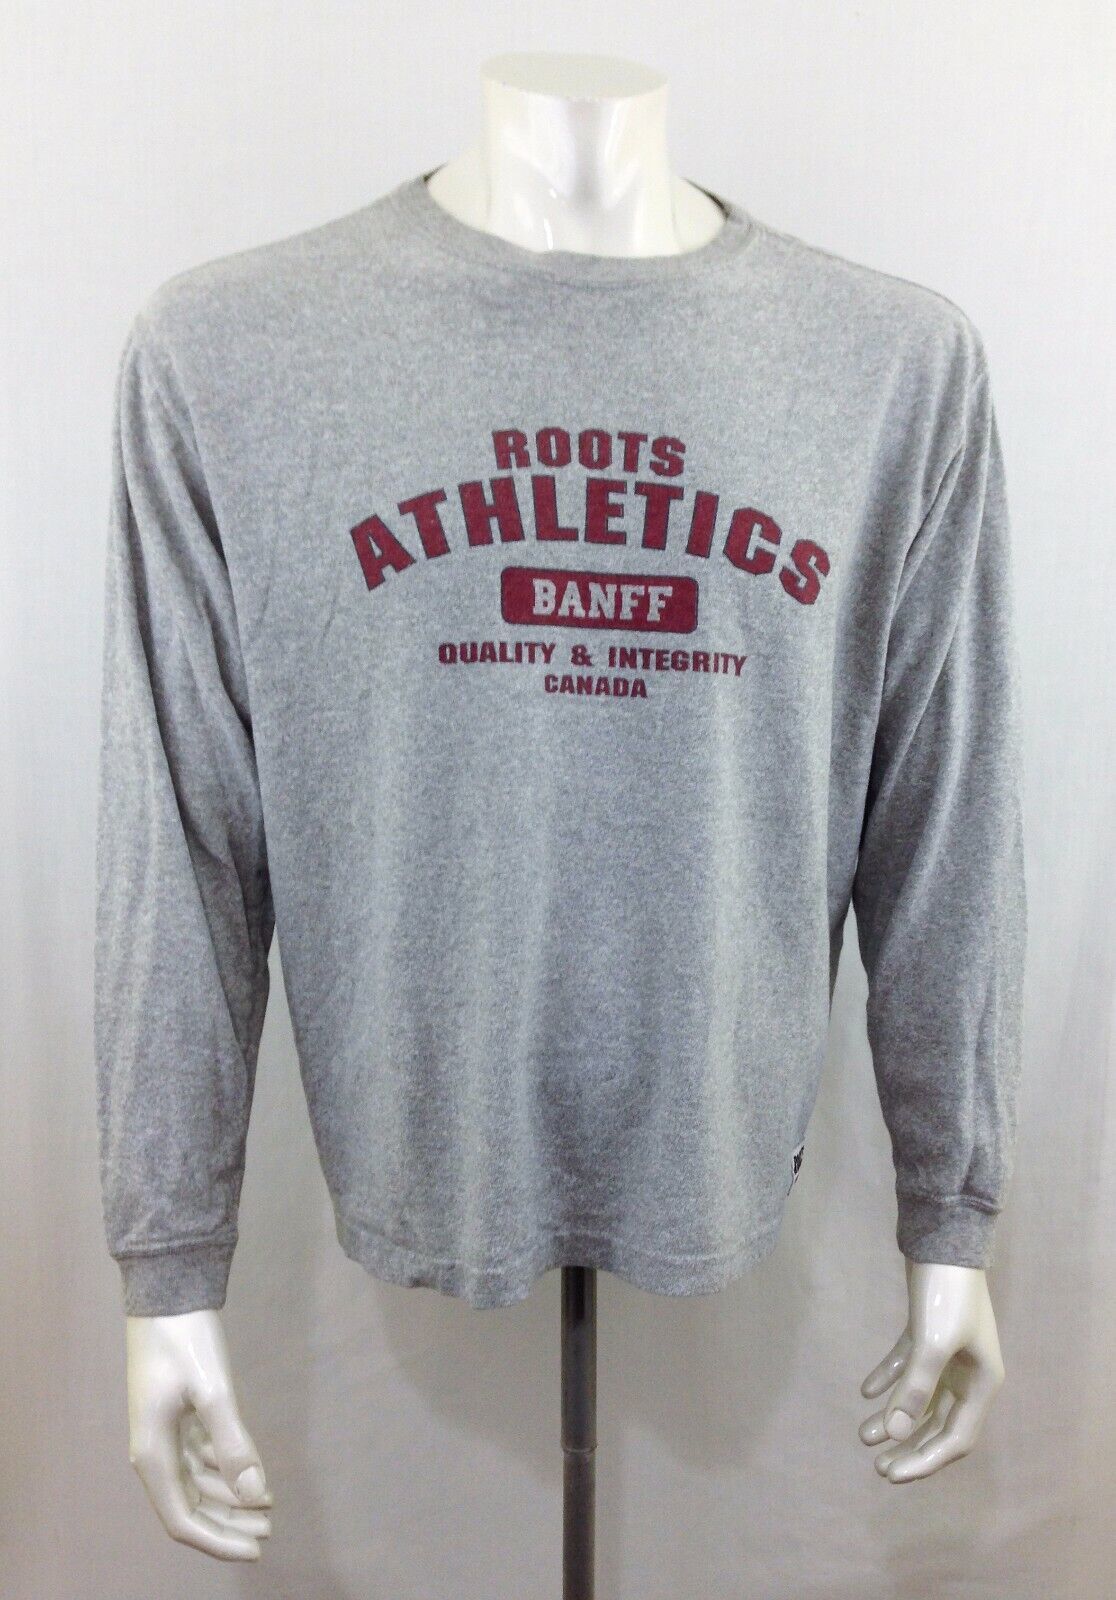 Primary image for Roots Athletics Banff Men's Medium Gray Long Sleeve Spell Out Crew Neck T Shirt